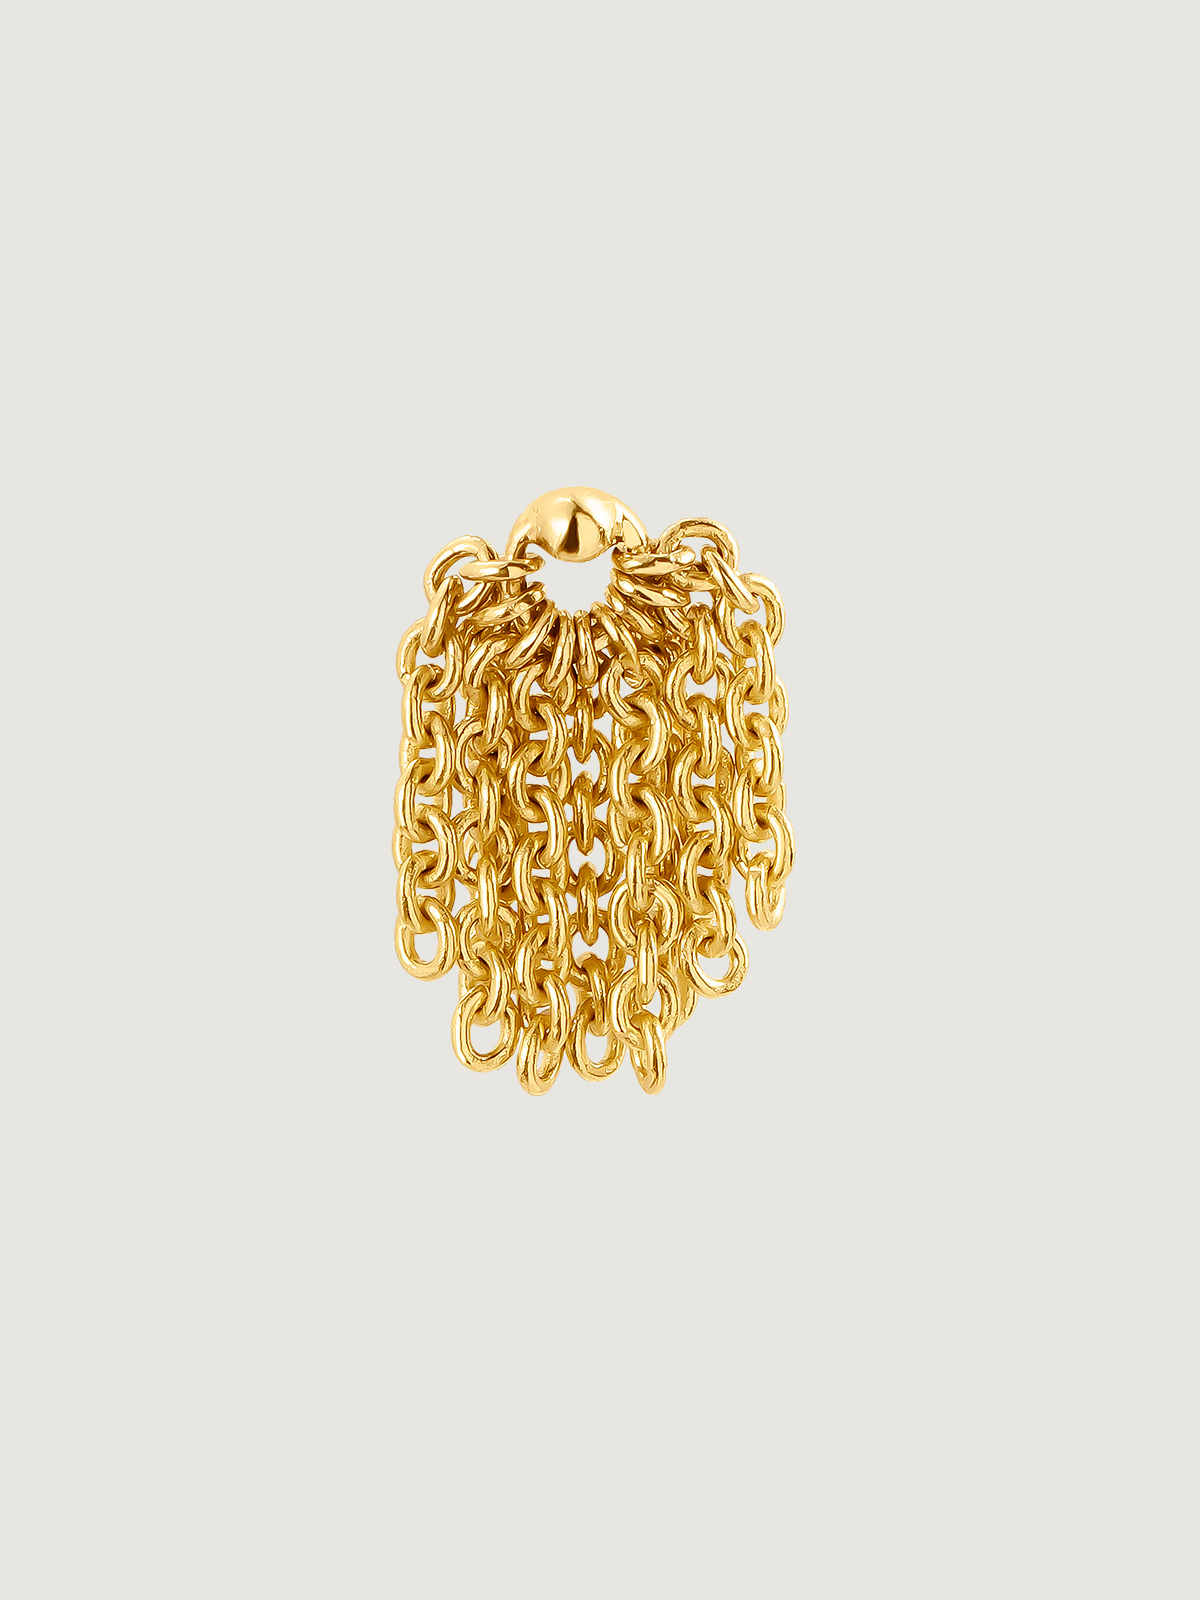 Individual 9K yellow gold earring with chain tassel.